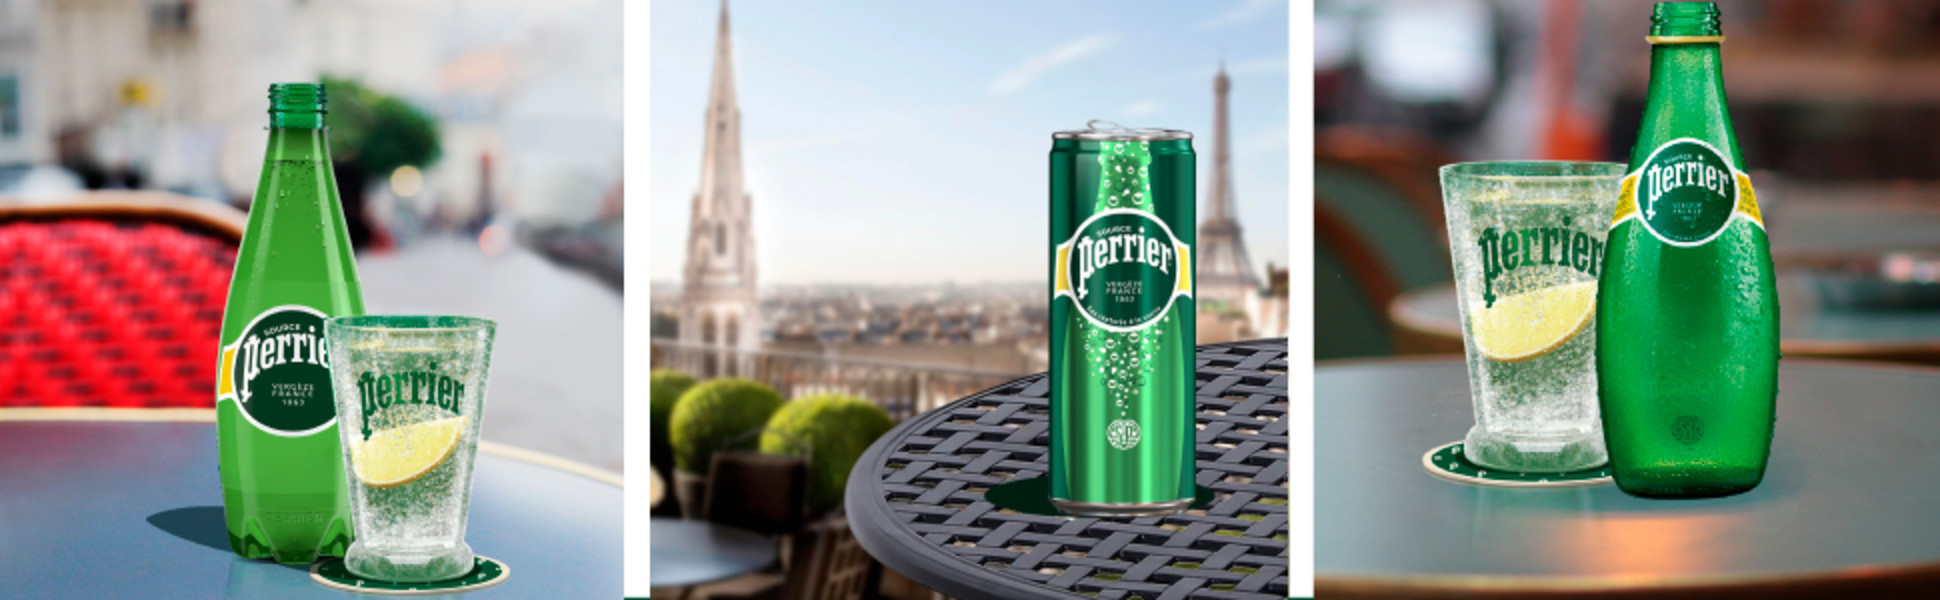 Perrier sparkling mineral water bottles and can with lemon